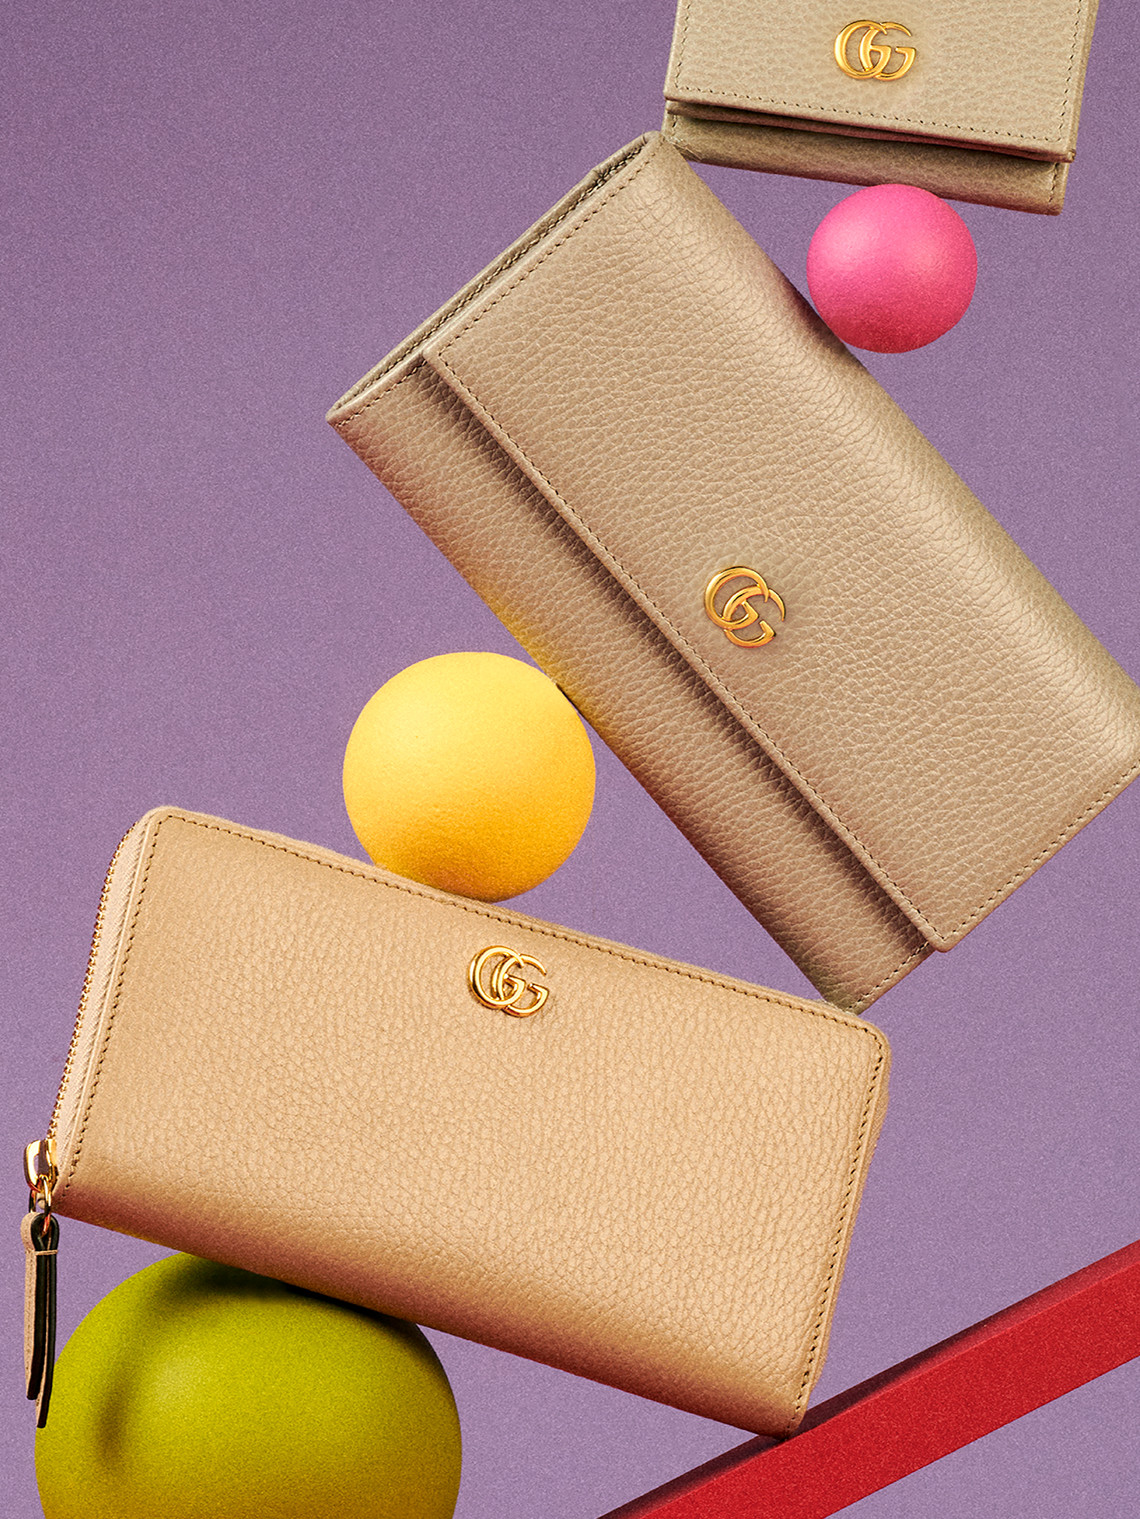 An image showcasing the Gucci women's small leathergoods collection.